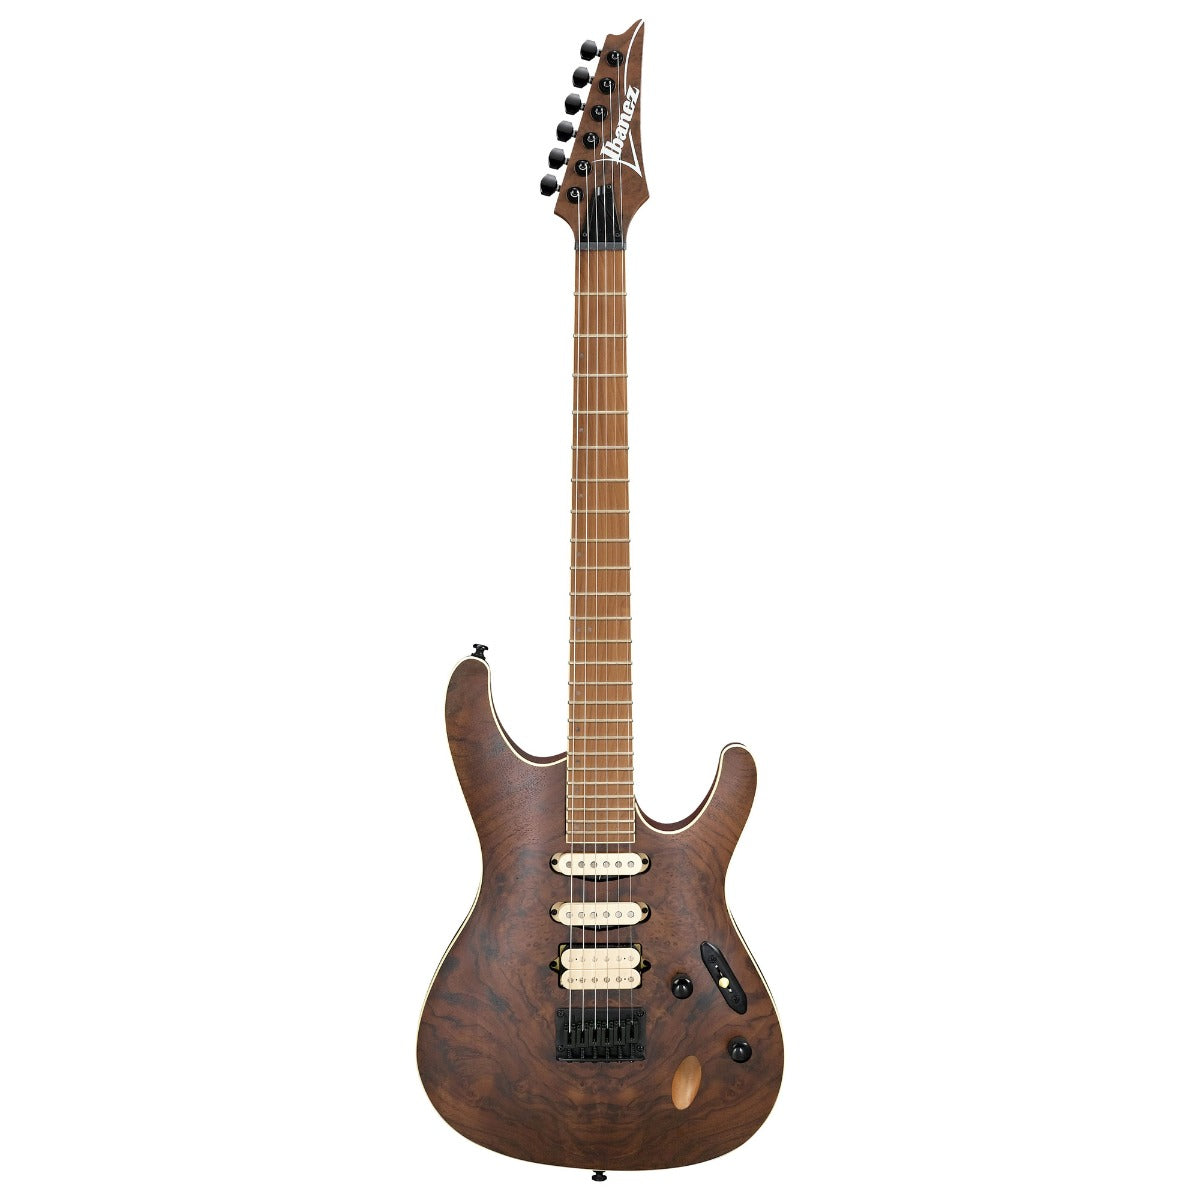 Ibanez SEW761 SEW Series 6 String Electric Guitar in Natural Flight (SEW761MCWNTF)